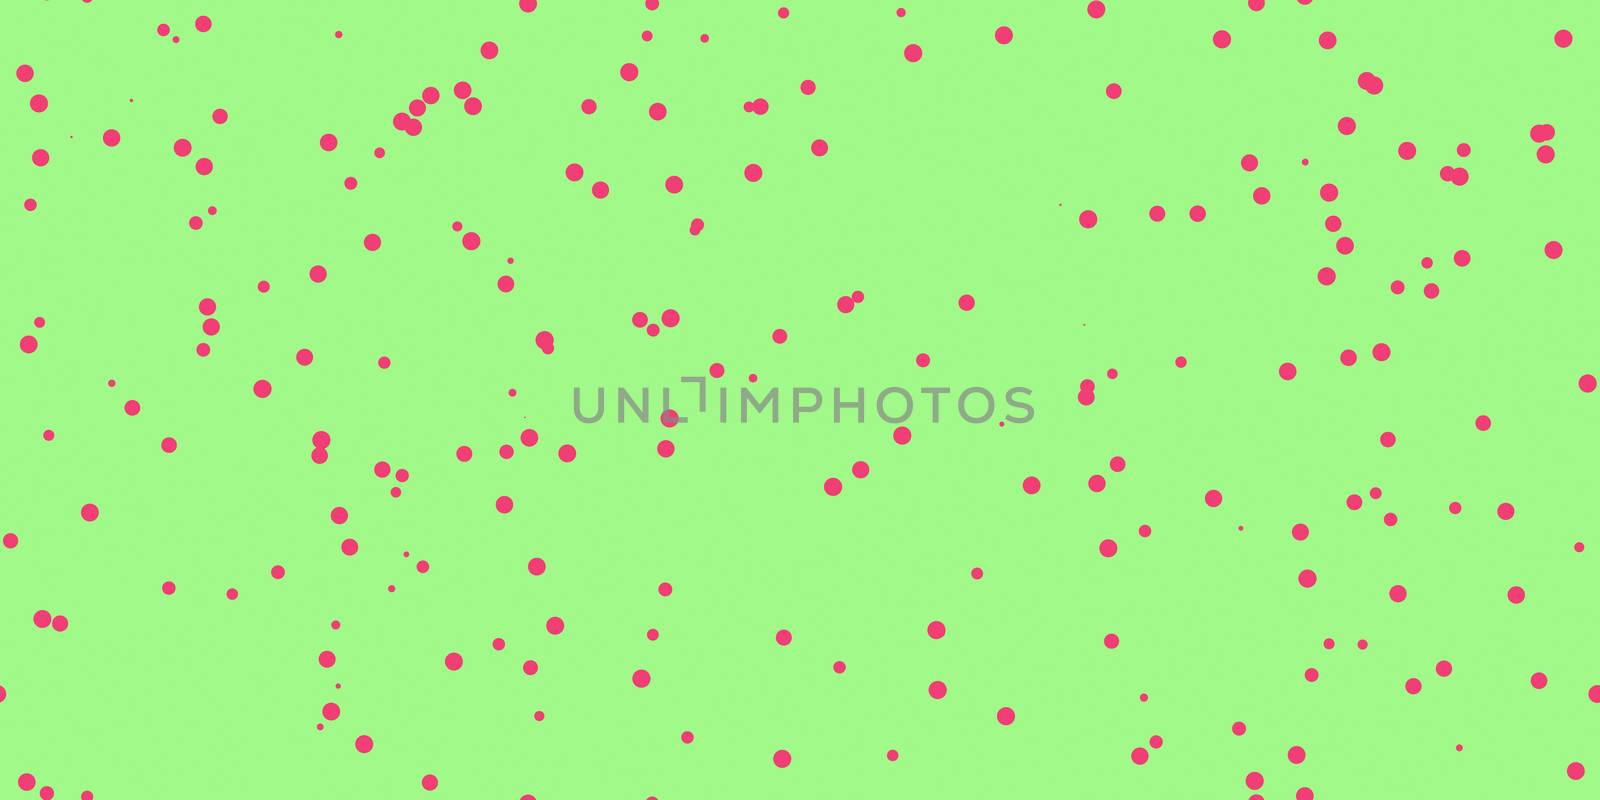 Green Lime Shambolic Bubbles Backgrounds. Seamless Artistic Random Dots Texture. Chaotic Bright Dots Backdrop.